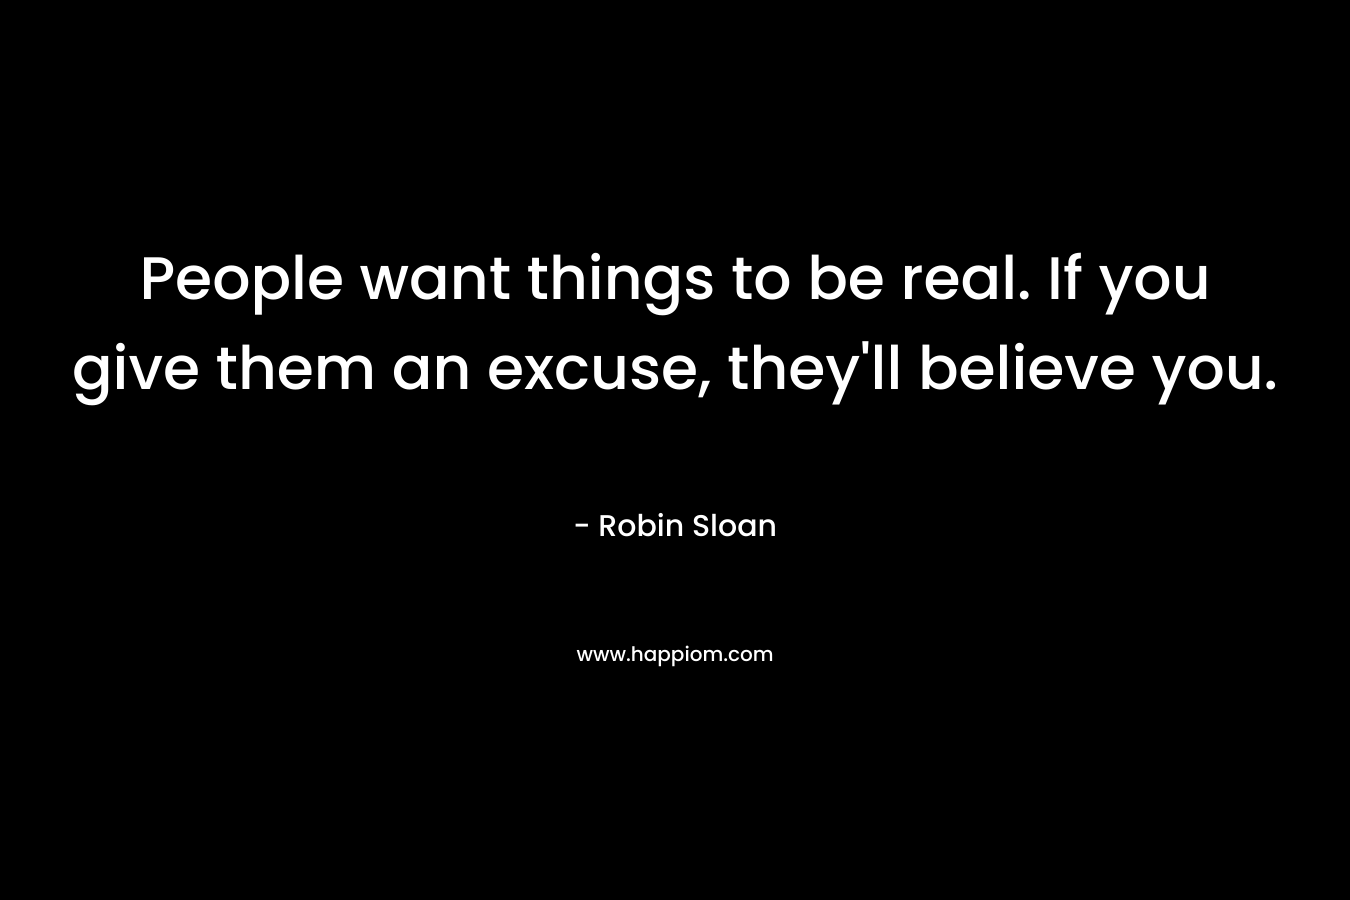 People want things to be real. If you give them an excuse, they'll believe you.